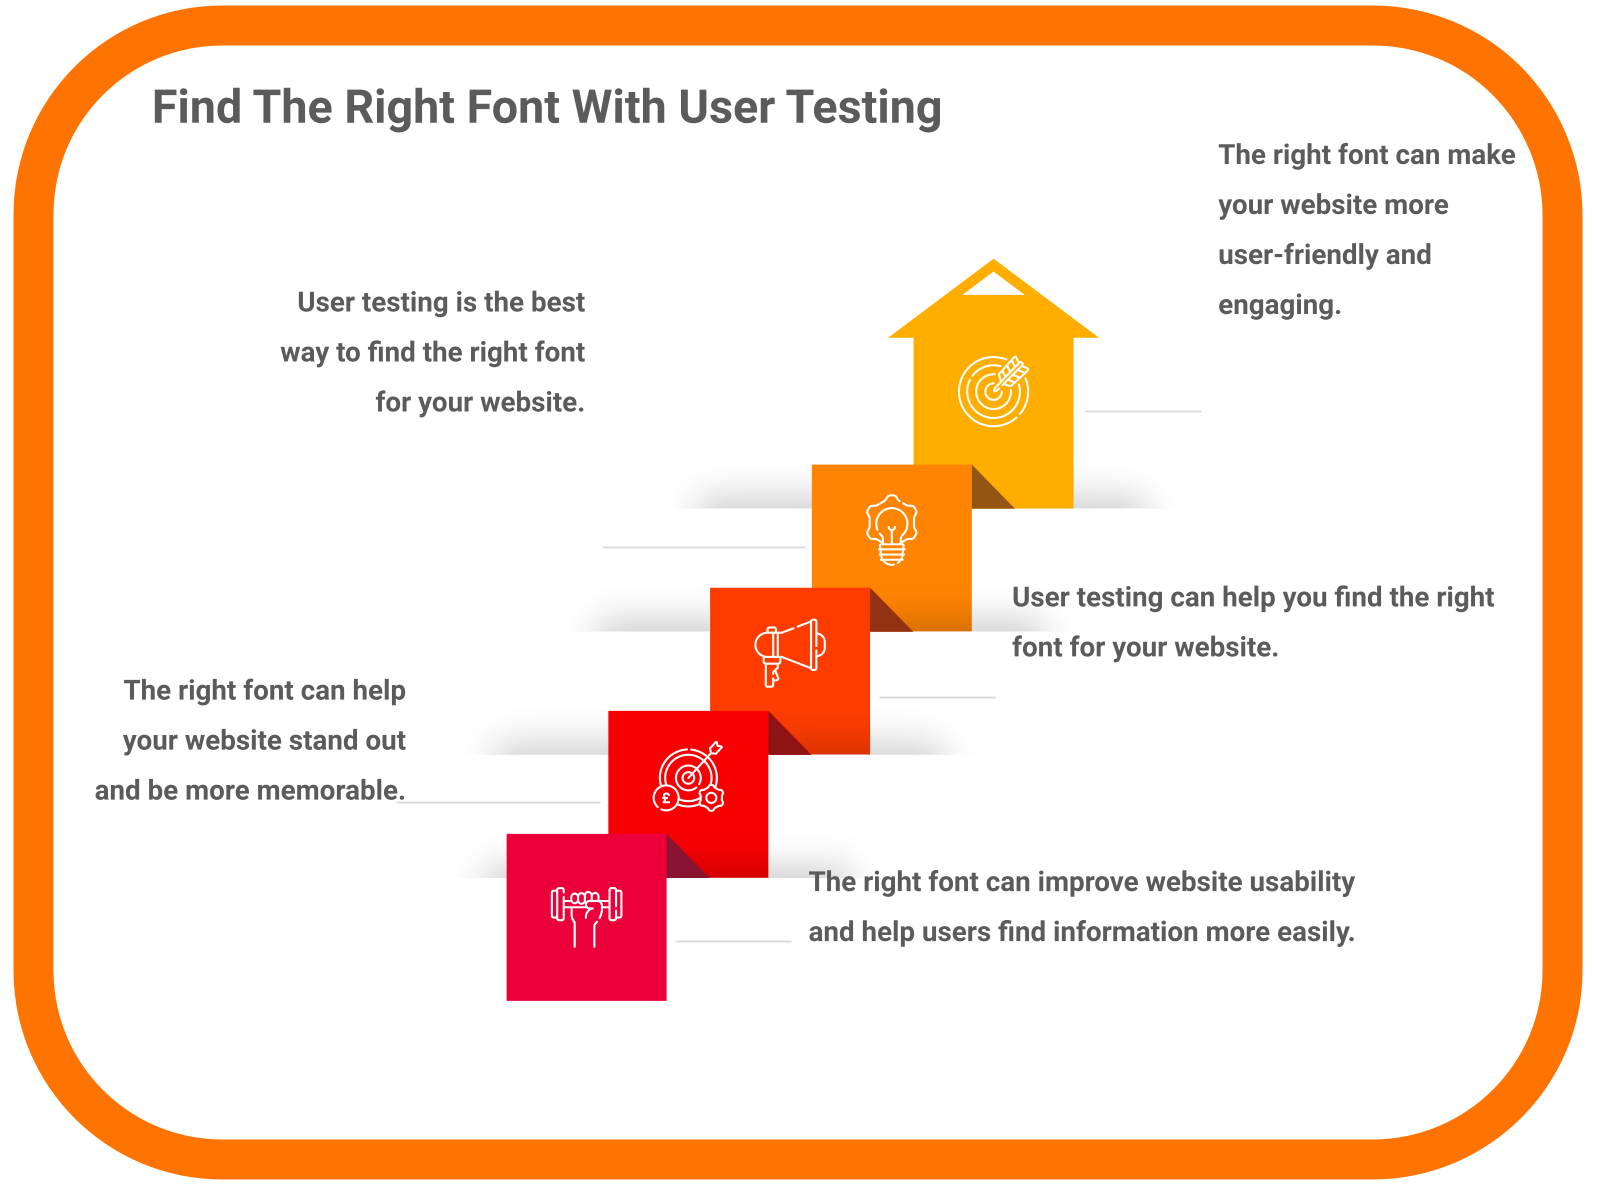 Find The Right Font With User Testing